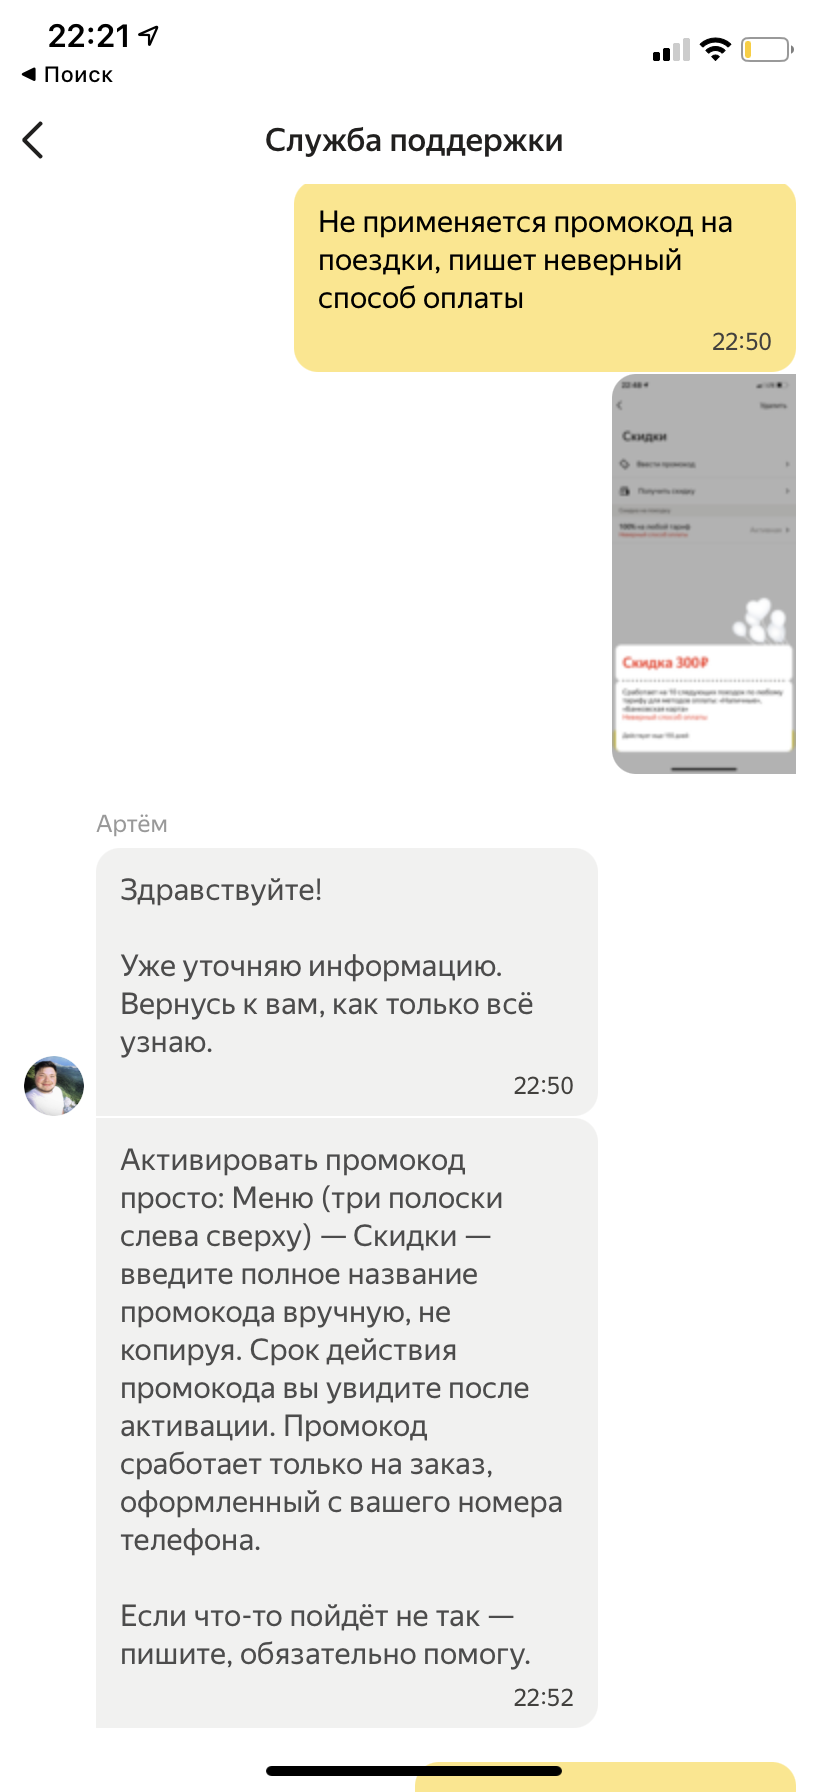 This has never happened before, and here it is again. Yandex Courier - My, Yandex., Yandex Delivery, Promo code, Deception, Bad service, Longpost, Negative